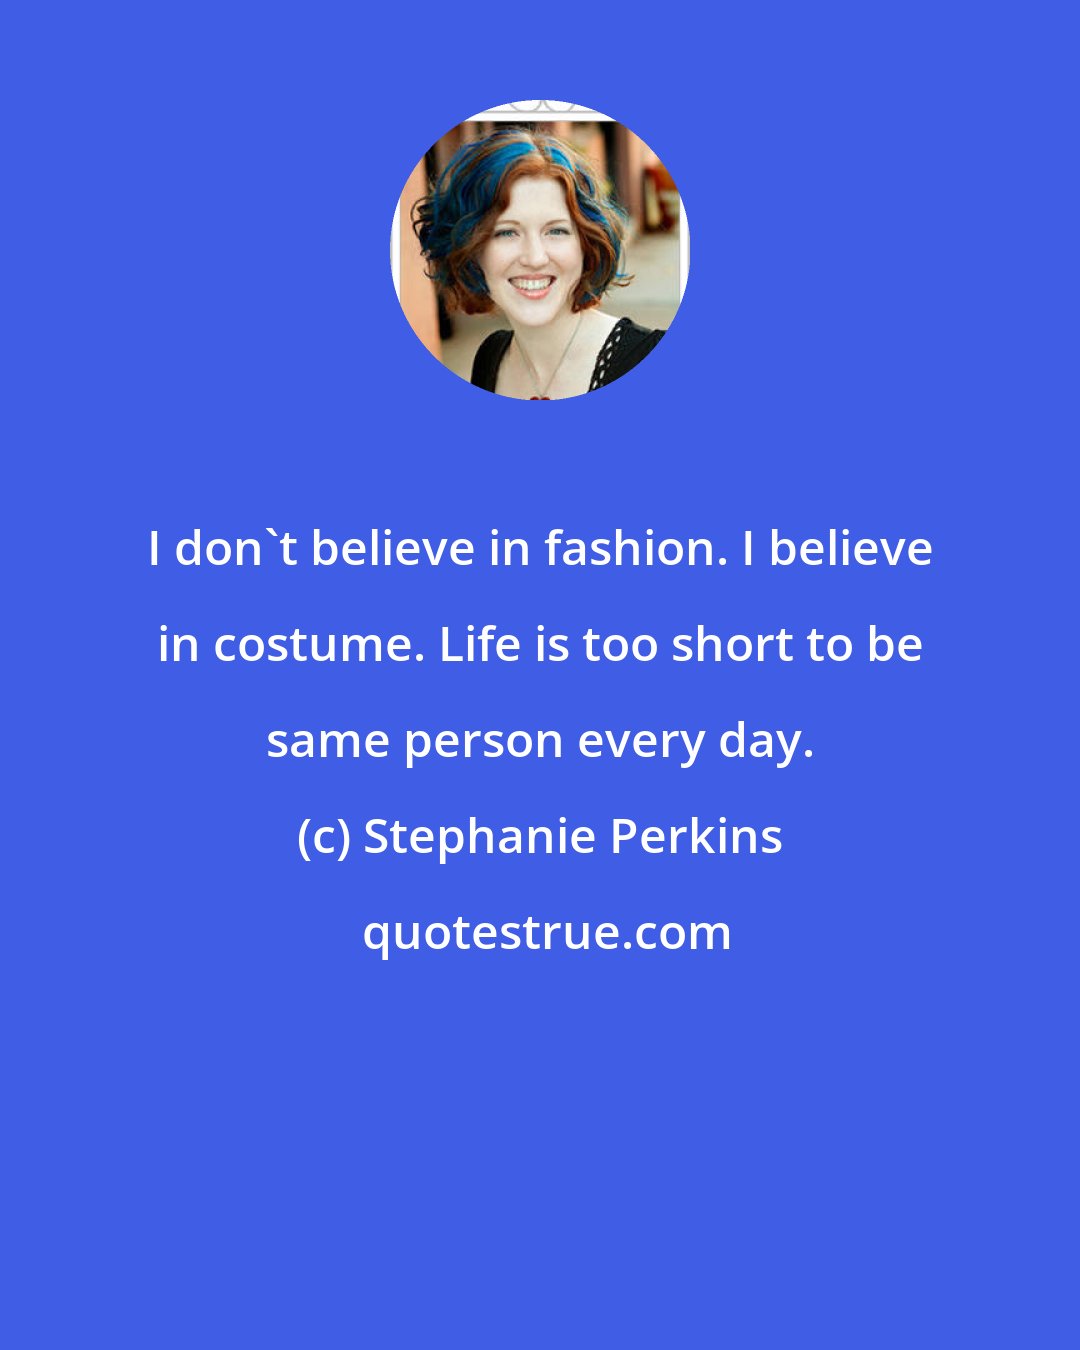 Stephanie Perkins: I don't believe in fashion. I believe in costume. Life is too short to be same person every day.